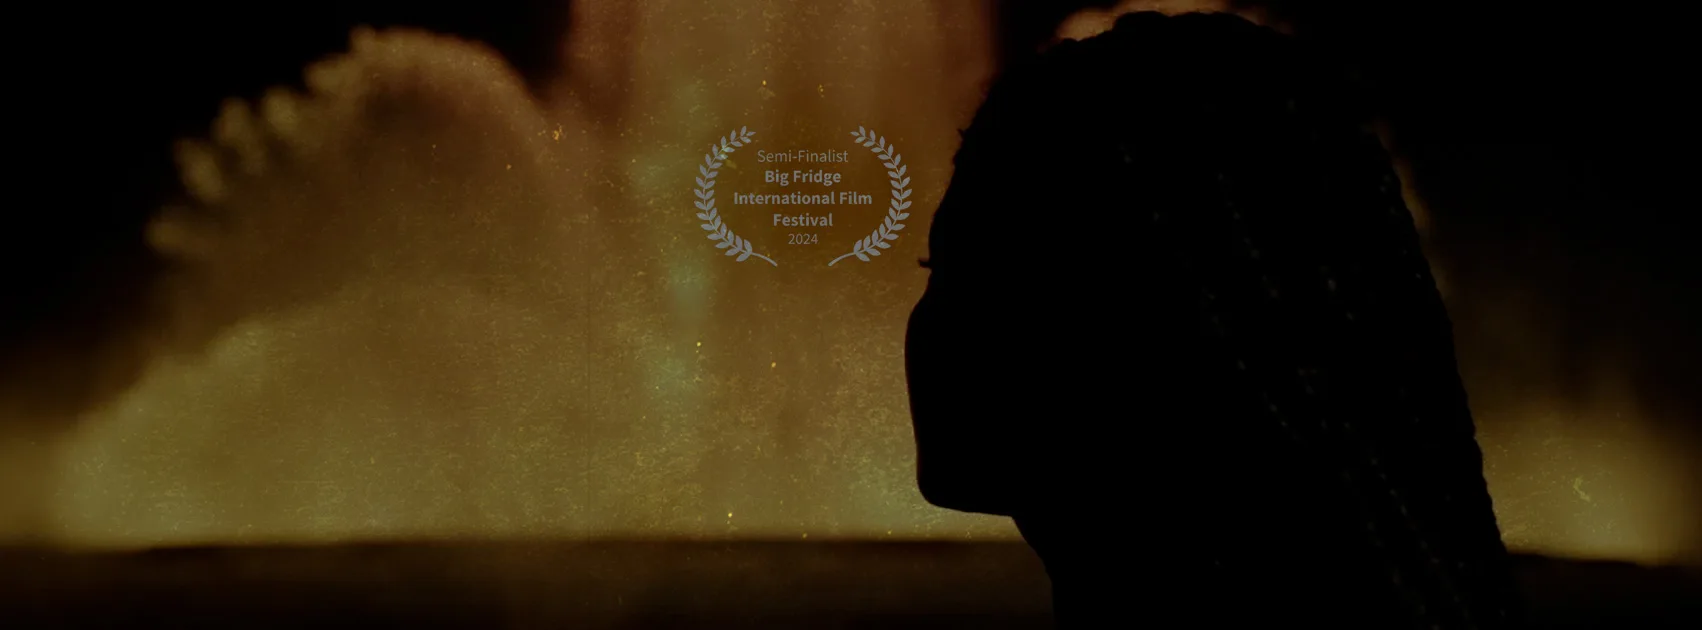 The short documentary "As leaves in the wind" by Sofia Luz is semi-finalist at Big Fridge International Film Festival